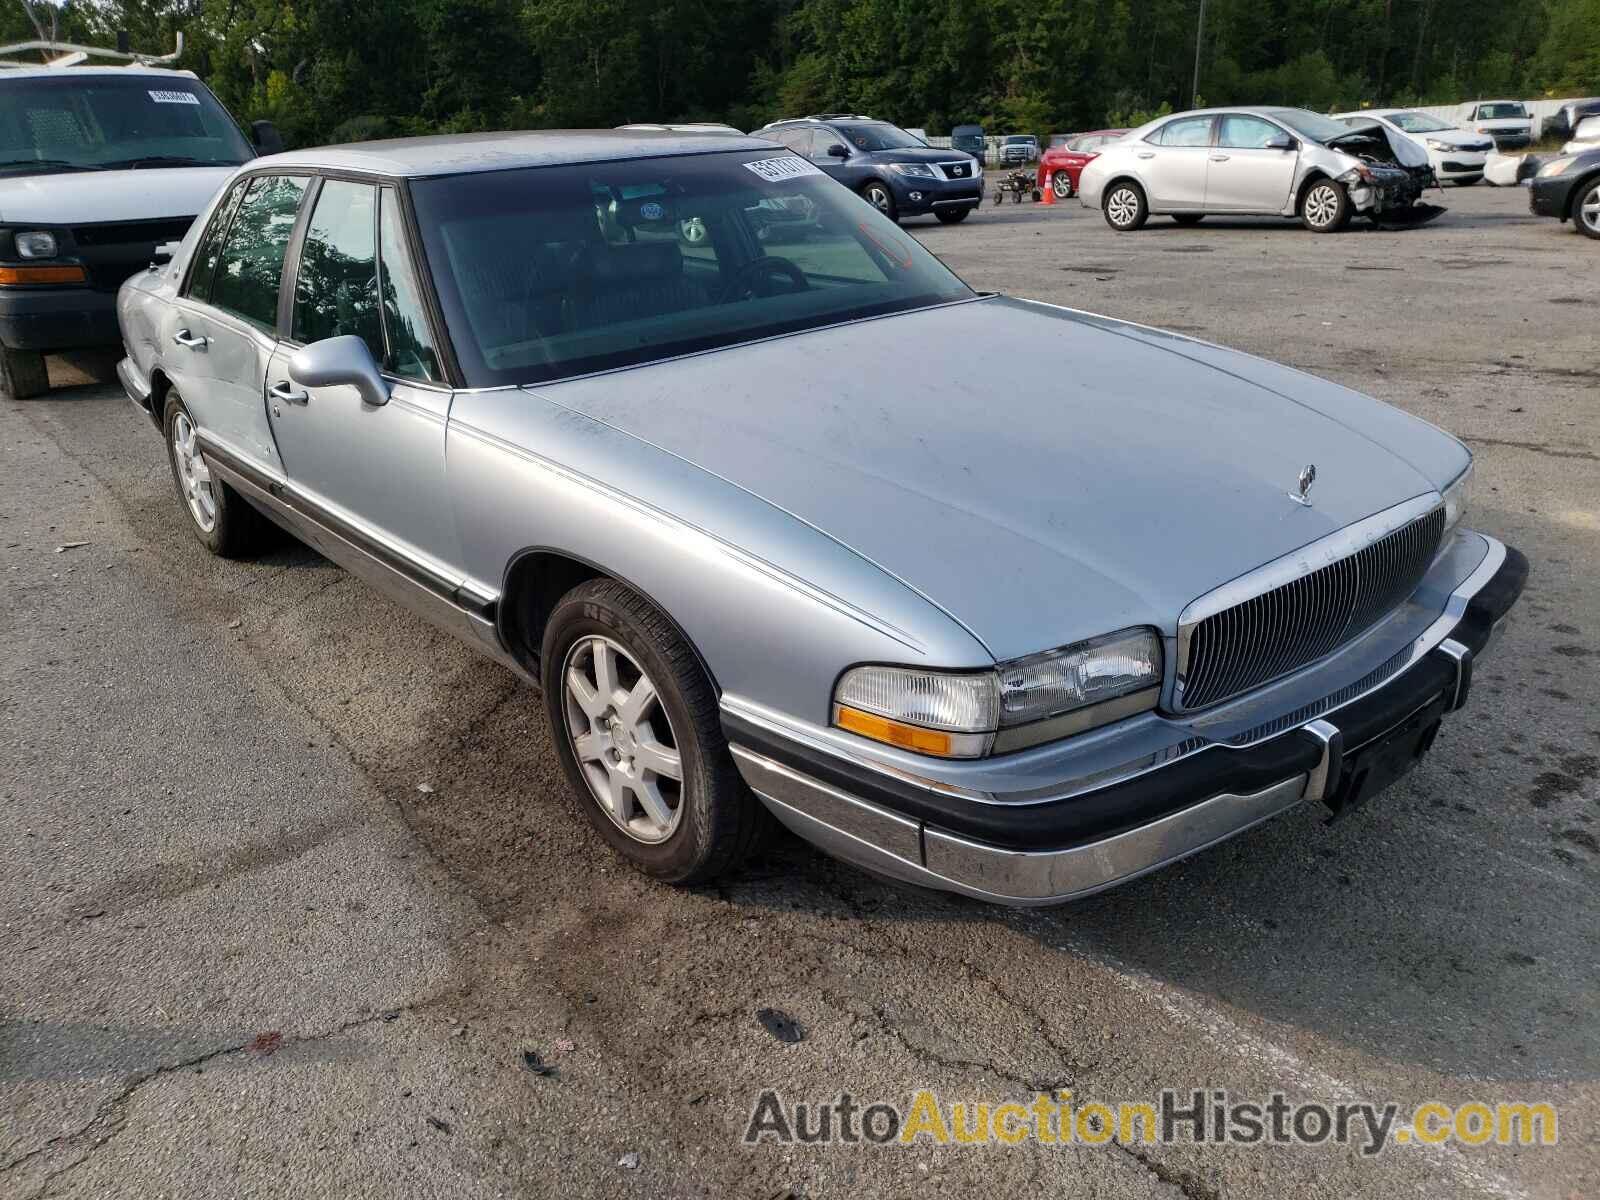 1994 BUICK PARK AVE, 1G4CW52L8R1600252